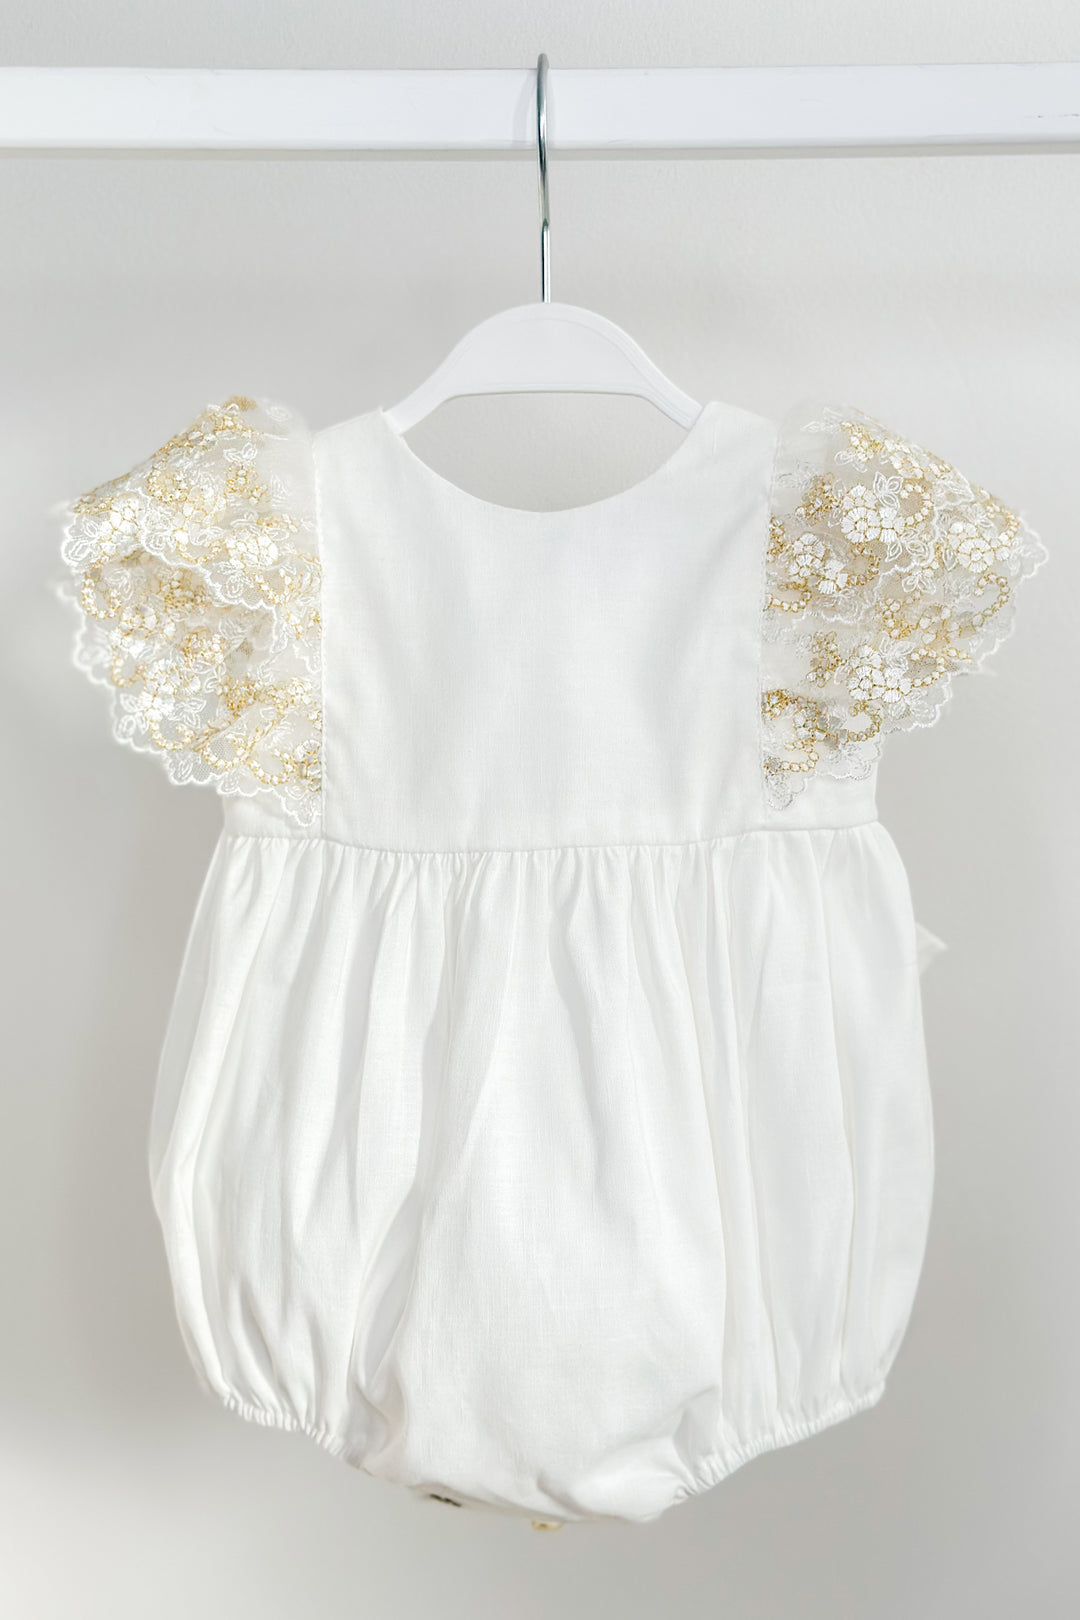 Fofettes "Alya" Ivory Gold Lace Sleeve Romper | Millie and John